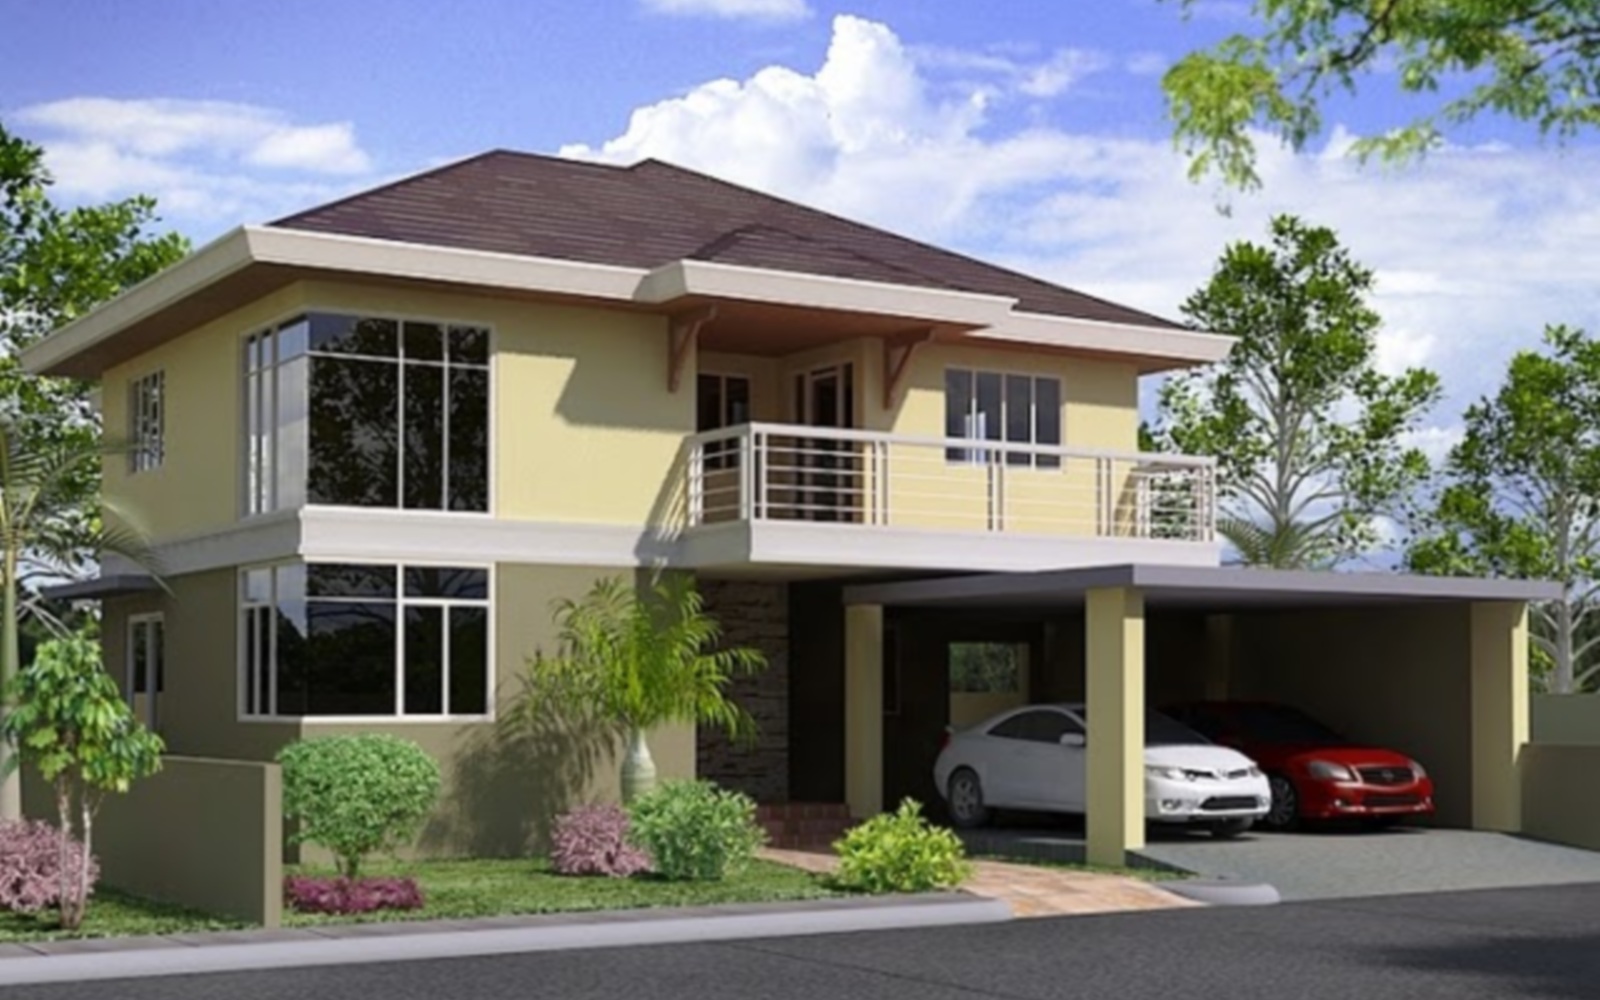 3 Story  Apartment Design  Philippines  Modern House 